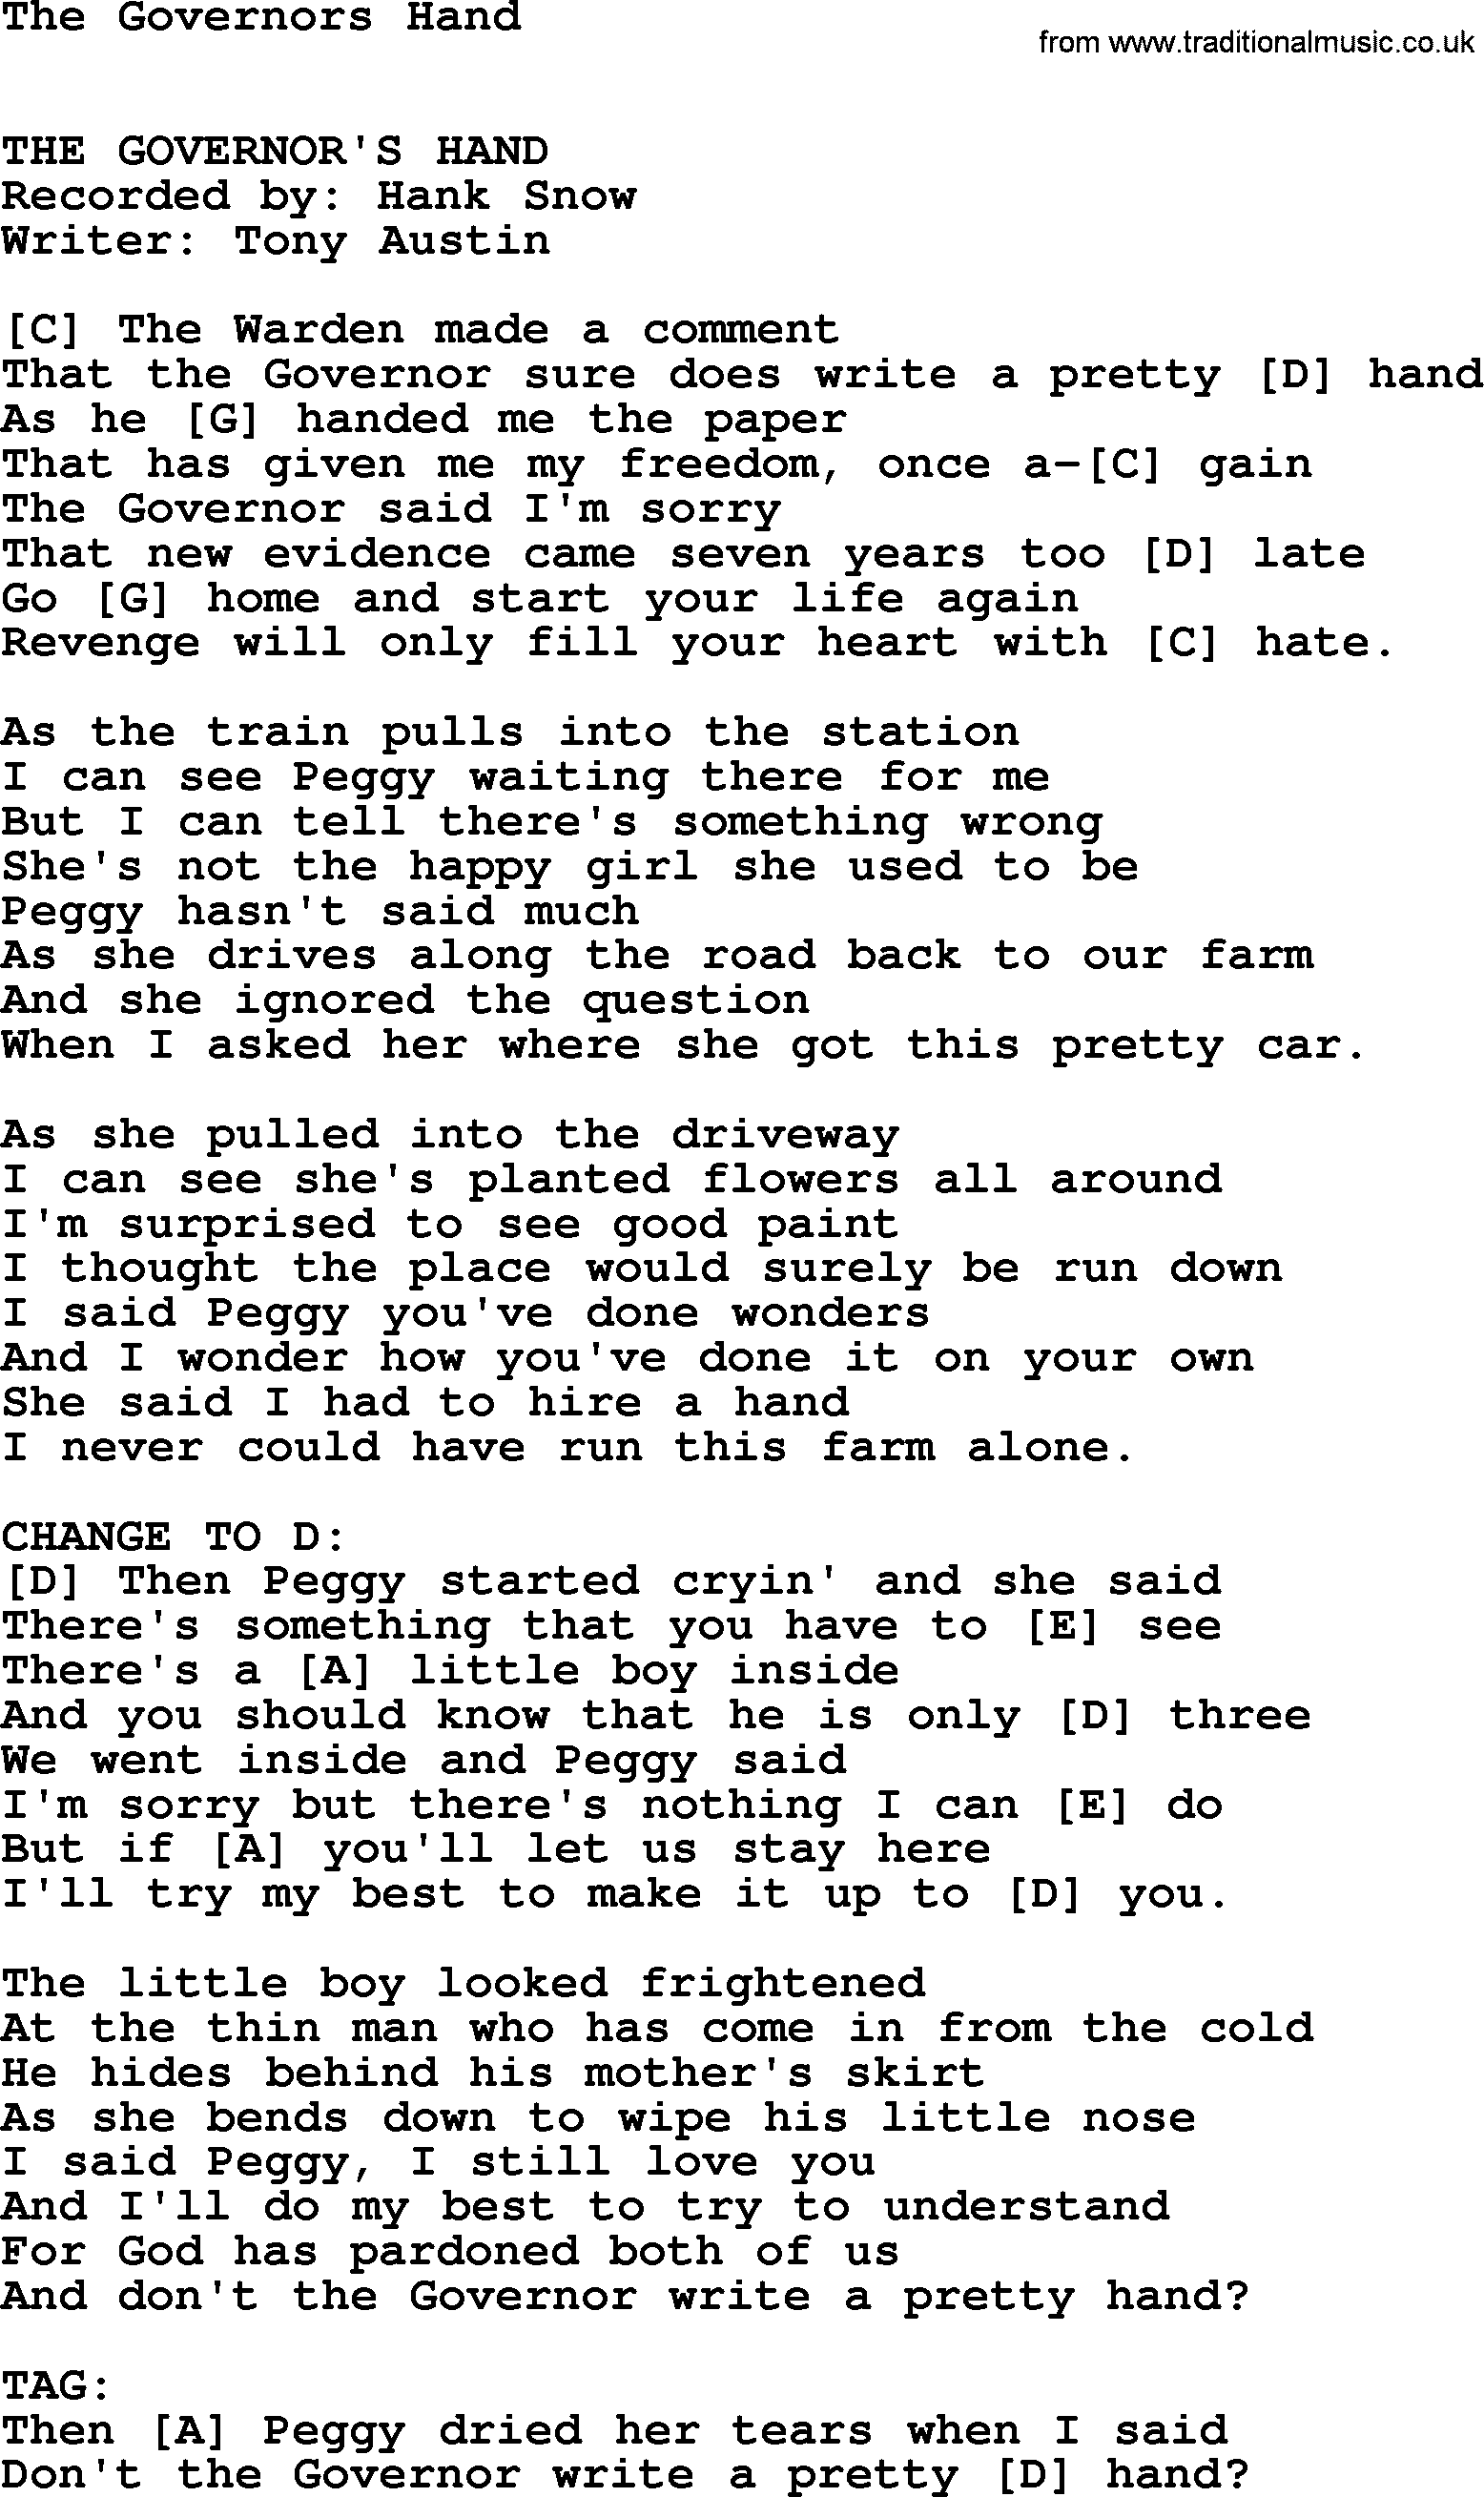 The Governors Hand - Bluegrass lyrics with chords